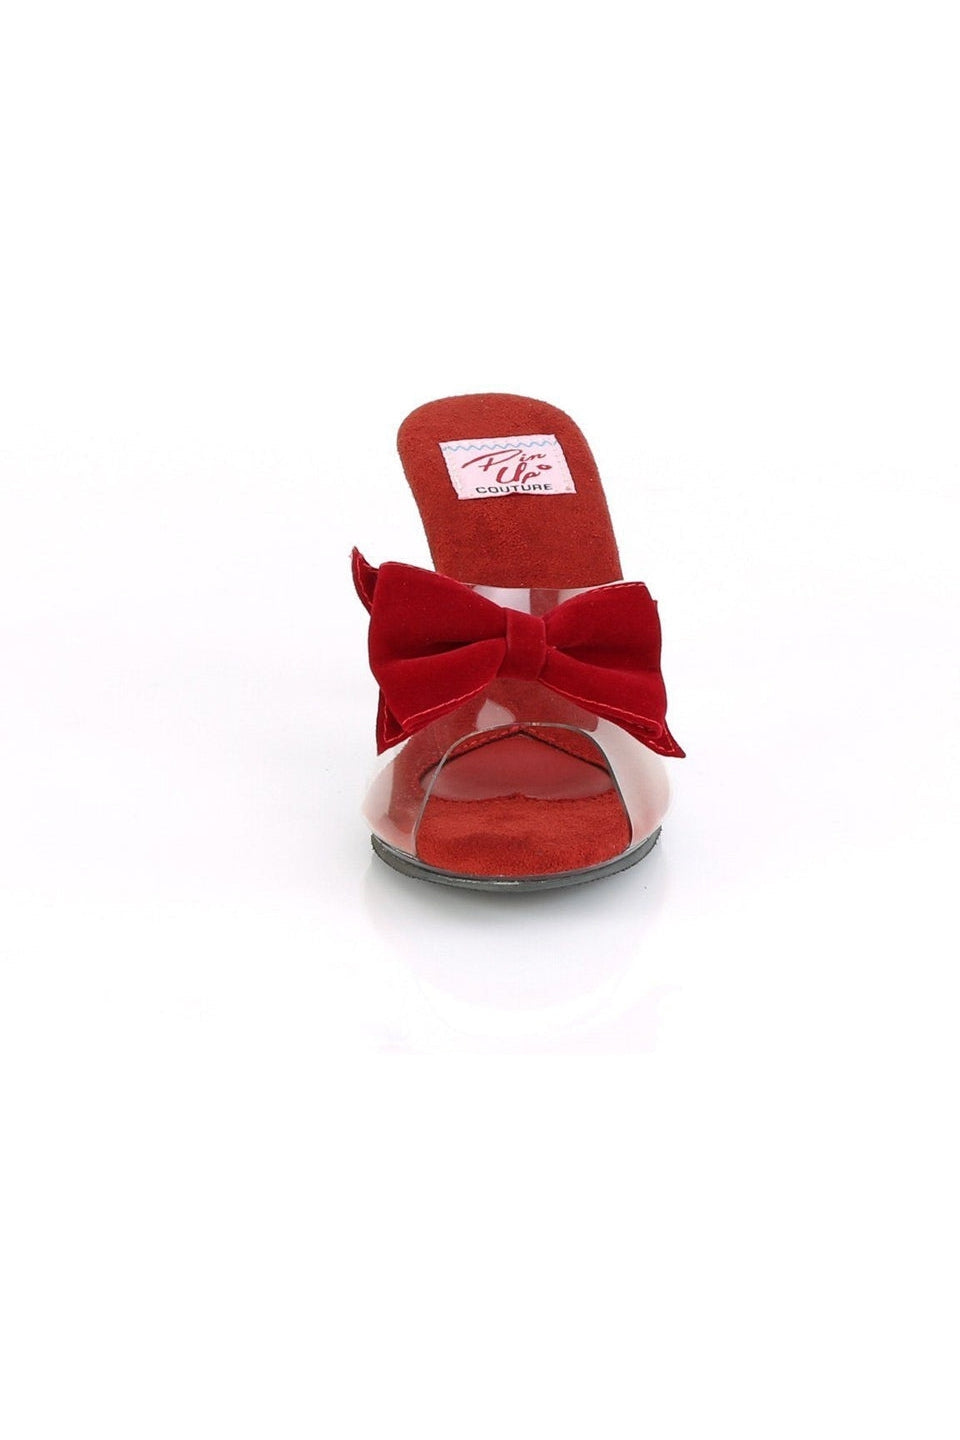 BELLE-301BOW Slide | Clear Vinyl-Slides-Pin Up Couture-SEXYSHOES.COM